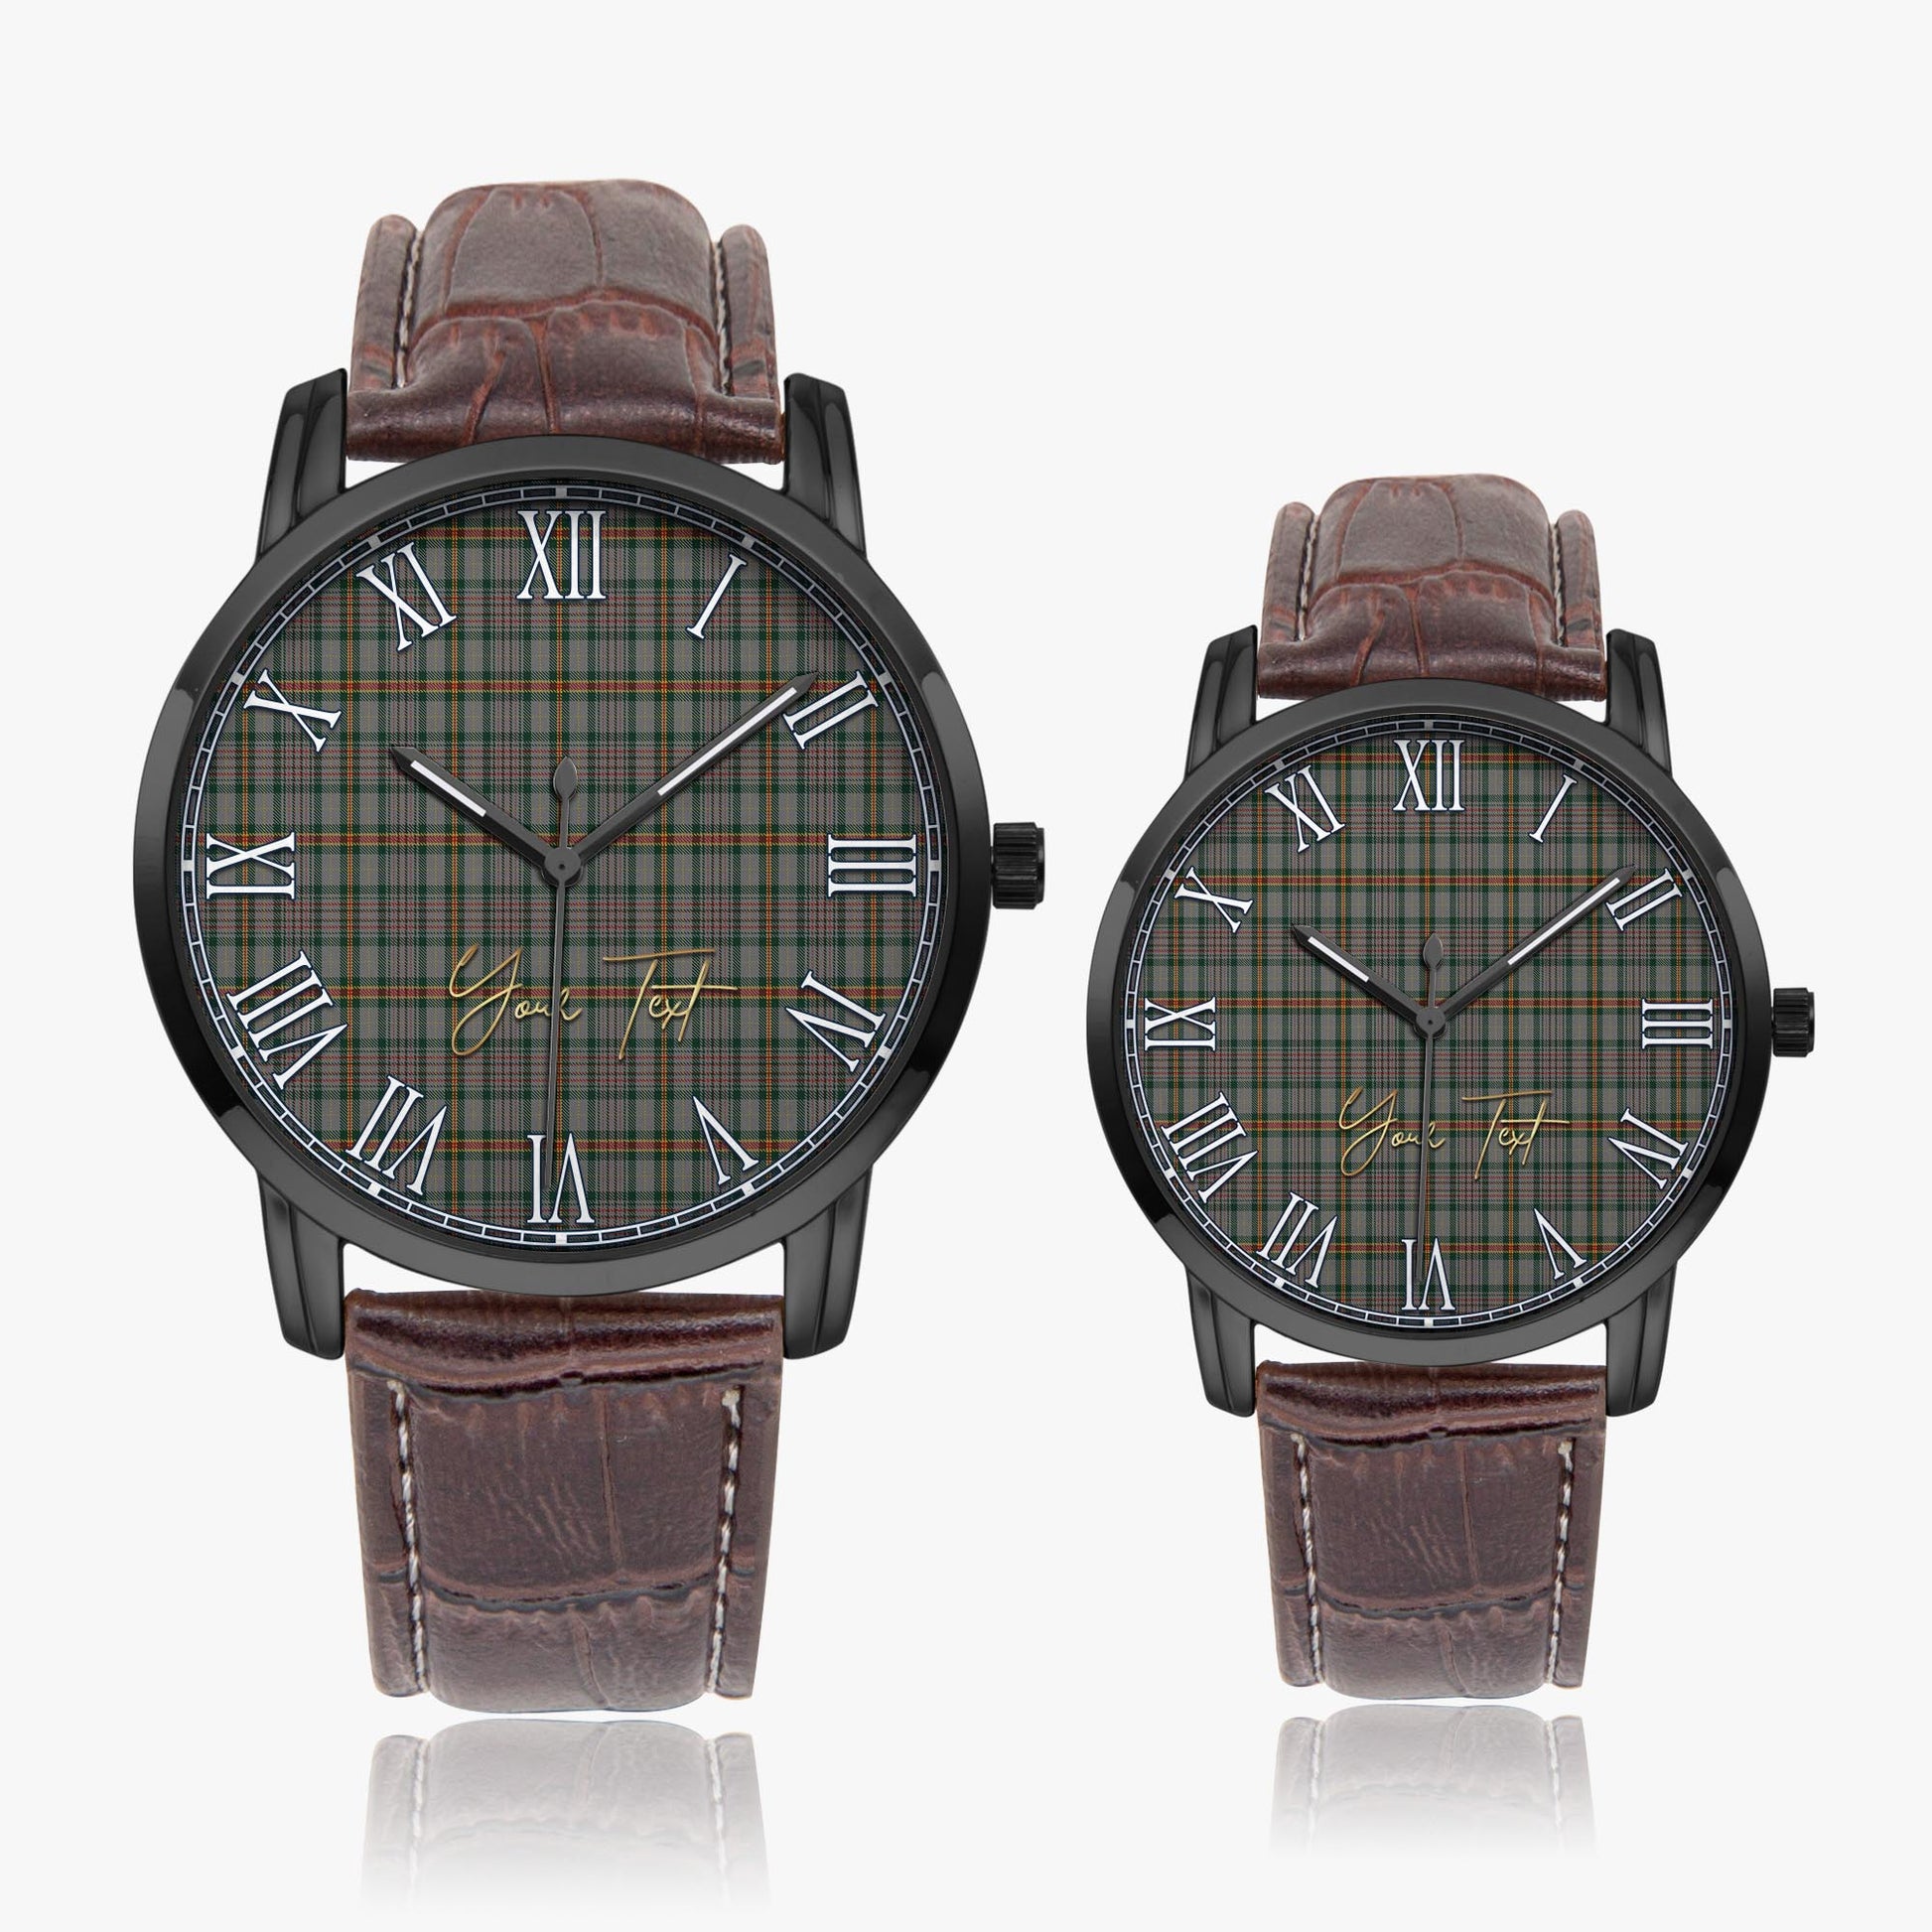 Howell of Wales Tartan Personalized Your Text Leather Trap Quartz Watch Wide Type Black Case With Brown Leather Strap - Tartanvibesclothing